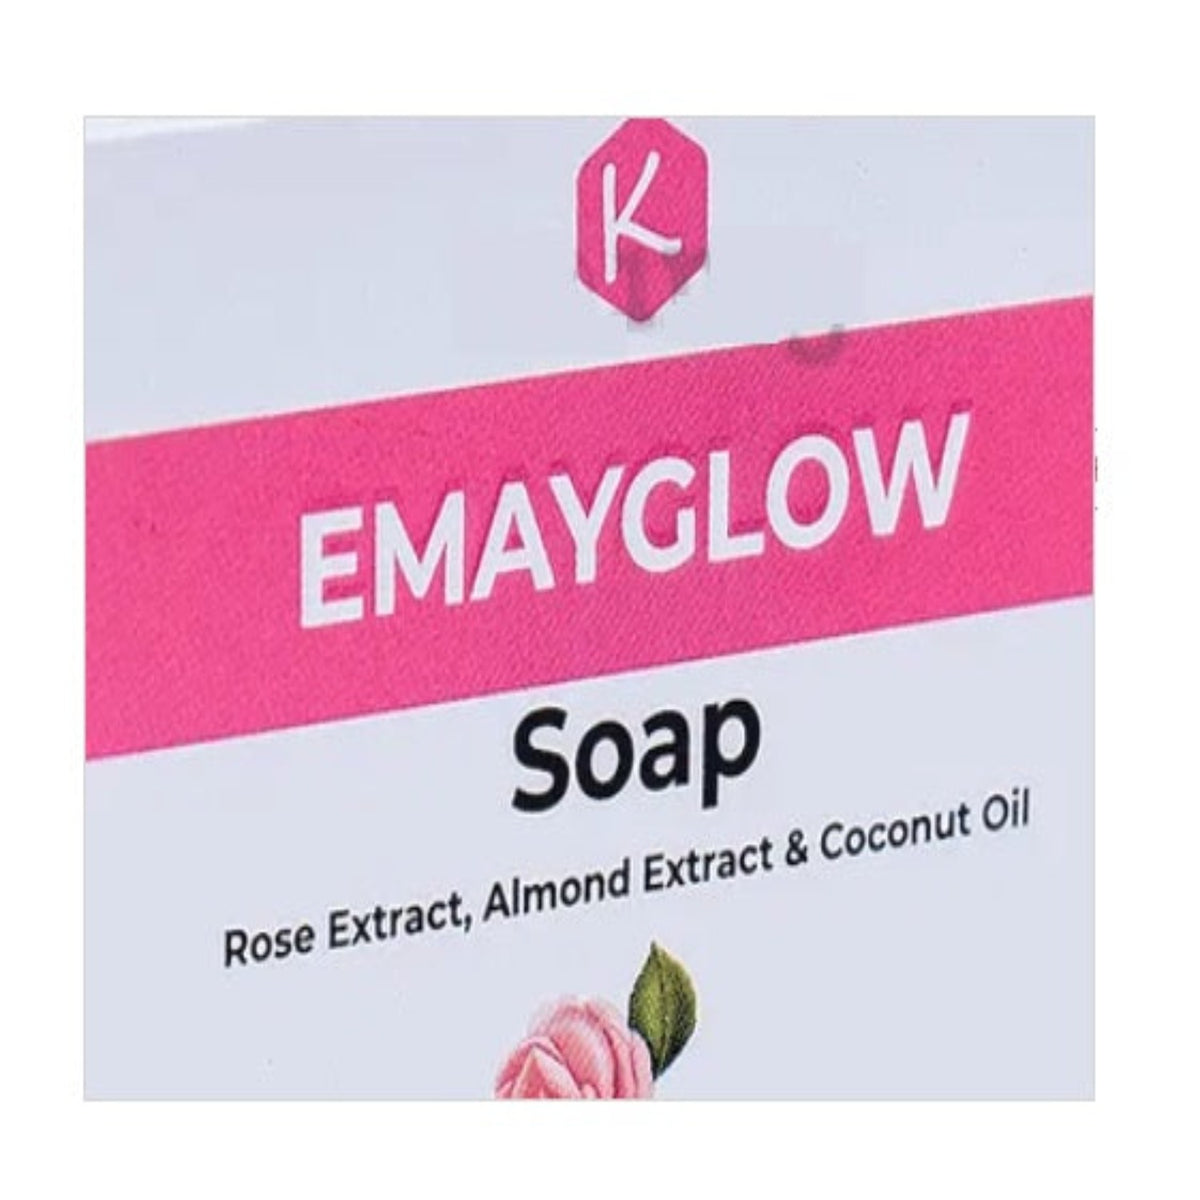 Kalyan Wellness Emayglow Rose Extract,Almond Extract & Coconut Oil Soap 75gm